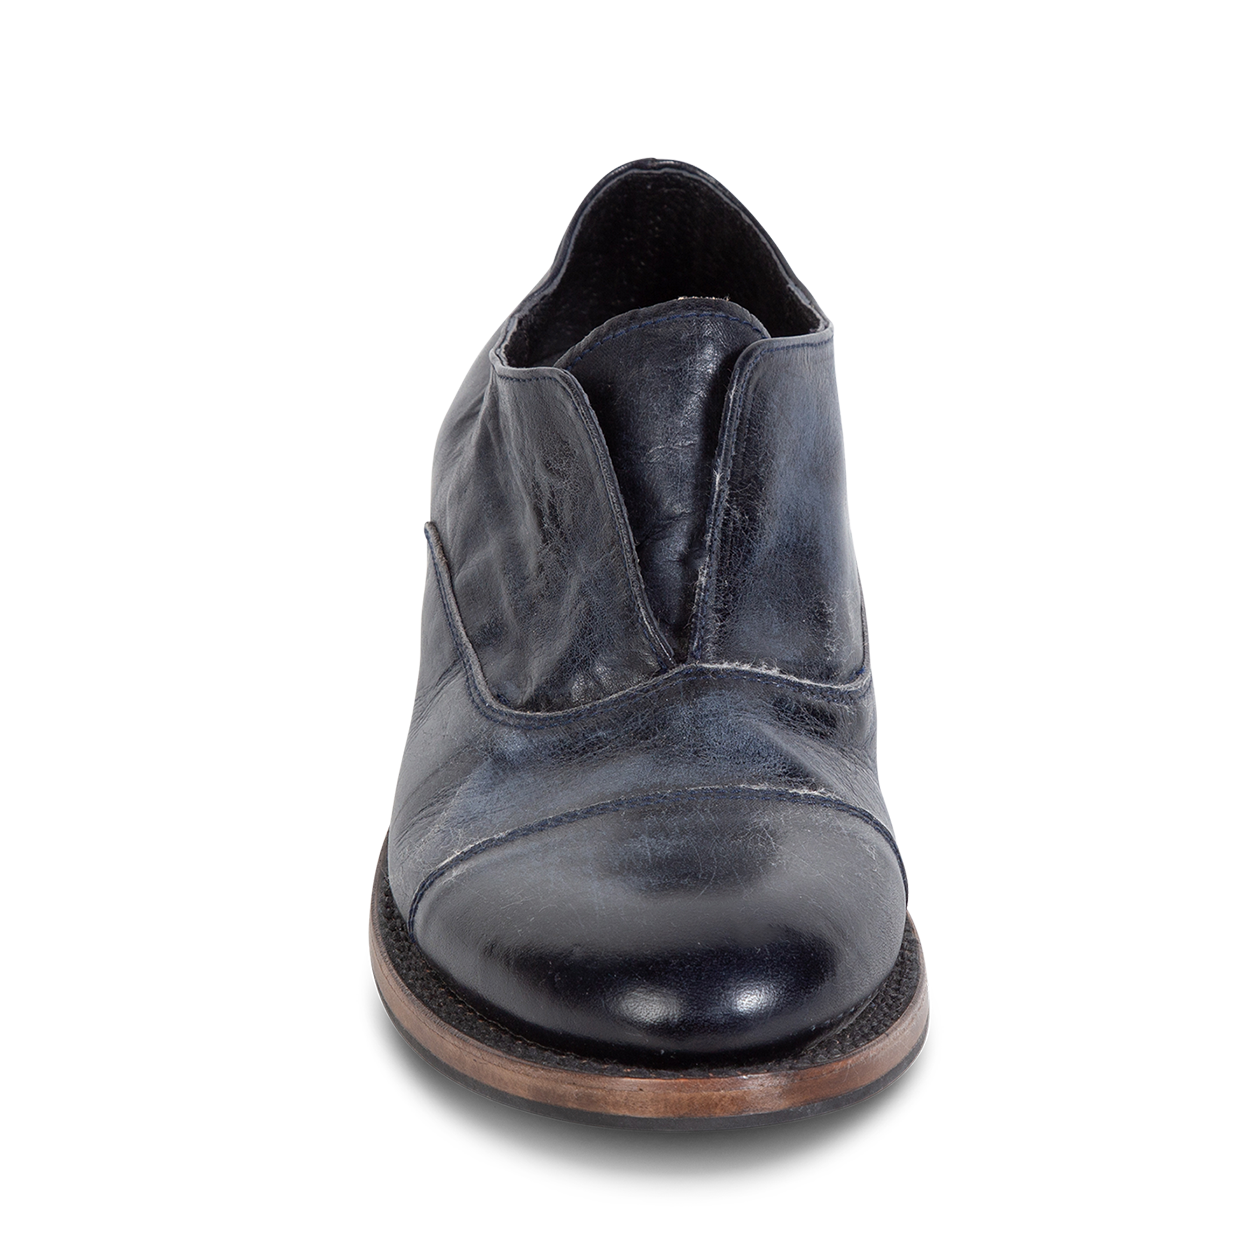 Front view showing loafer construction and almond toe on FREEBIRD men's Detrick navy shoe